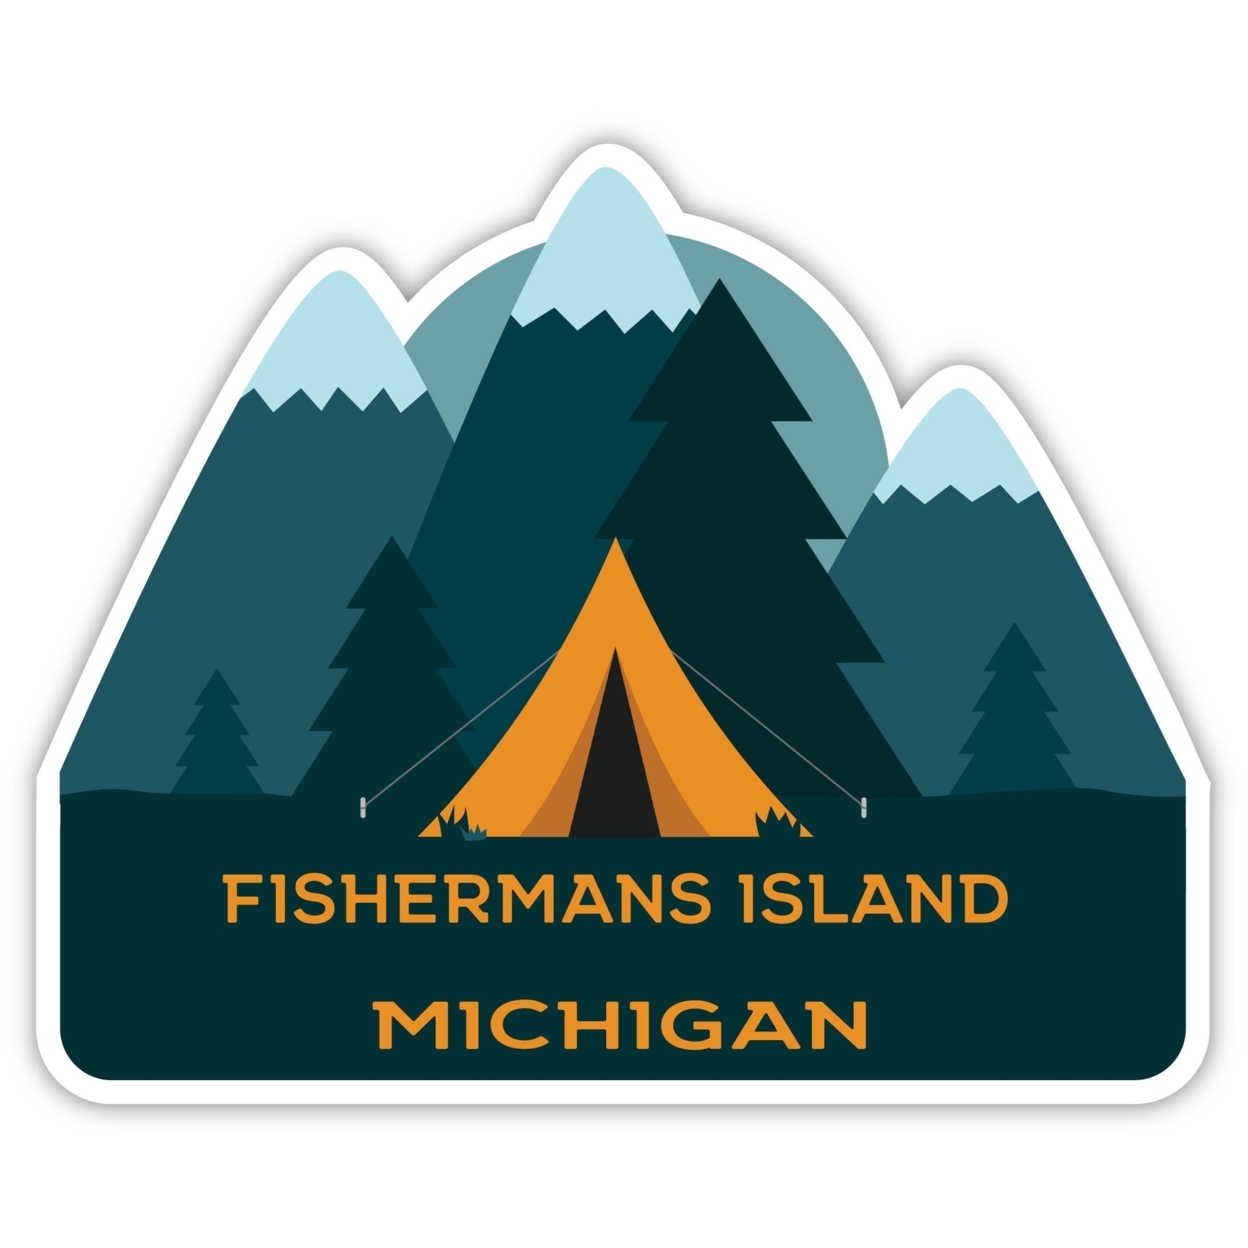 Fishermans Island Michigan Souvenir Decorative Stickers (Choose Theme And Size) - 4-Pack, 12-Inch, Tent